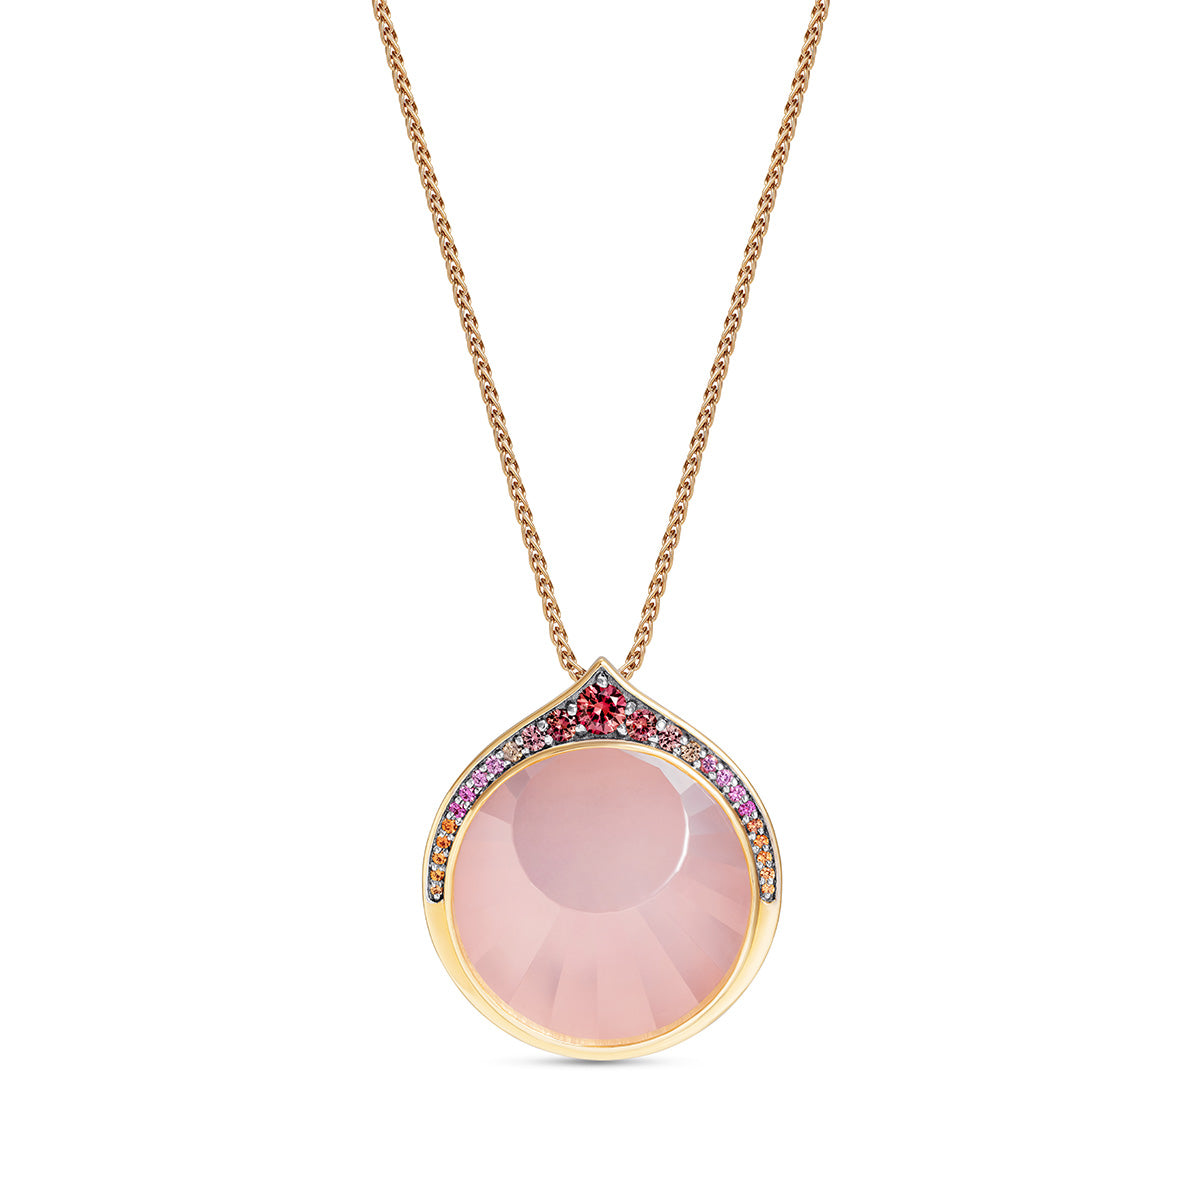 Noor Fares 18K Yellow Gold Rose Quartz Pendant with Coloured Sapphire Pavé and Pink Glitter Enamel